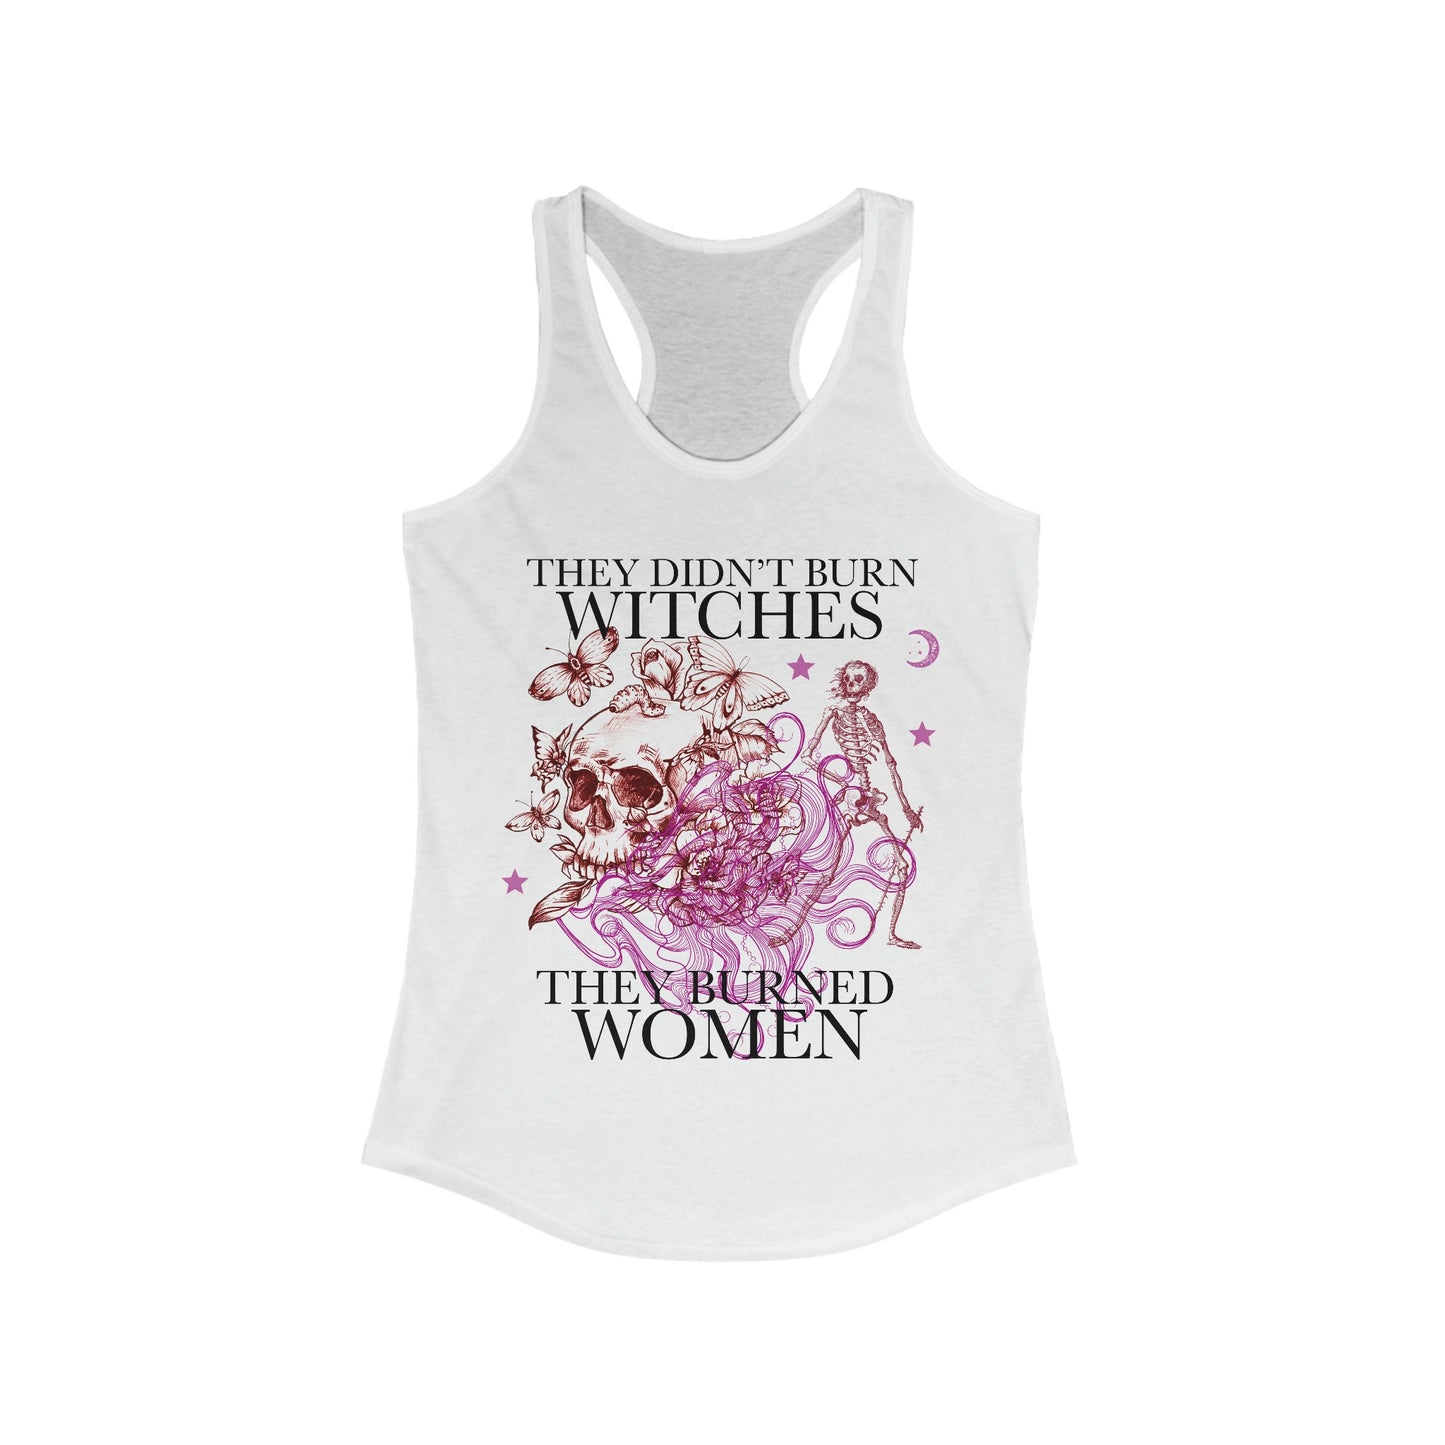 They didn't burn witches they burned women tank top